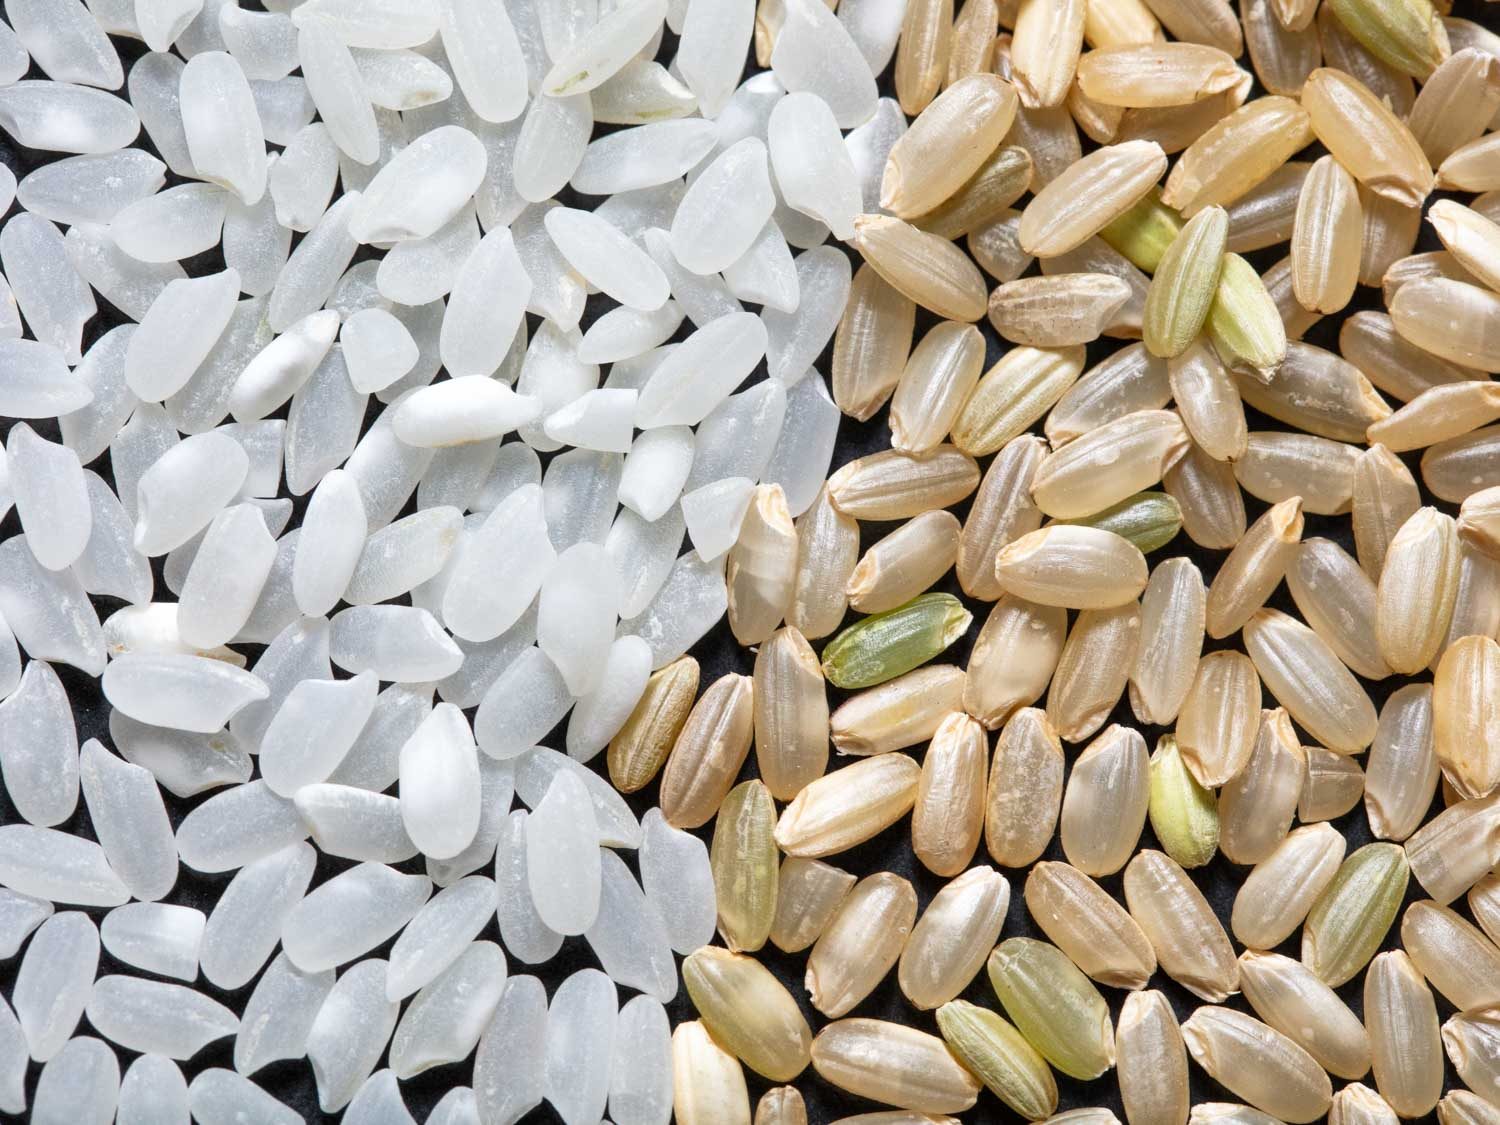 Short- to medium-grained white and brown rice